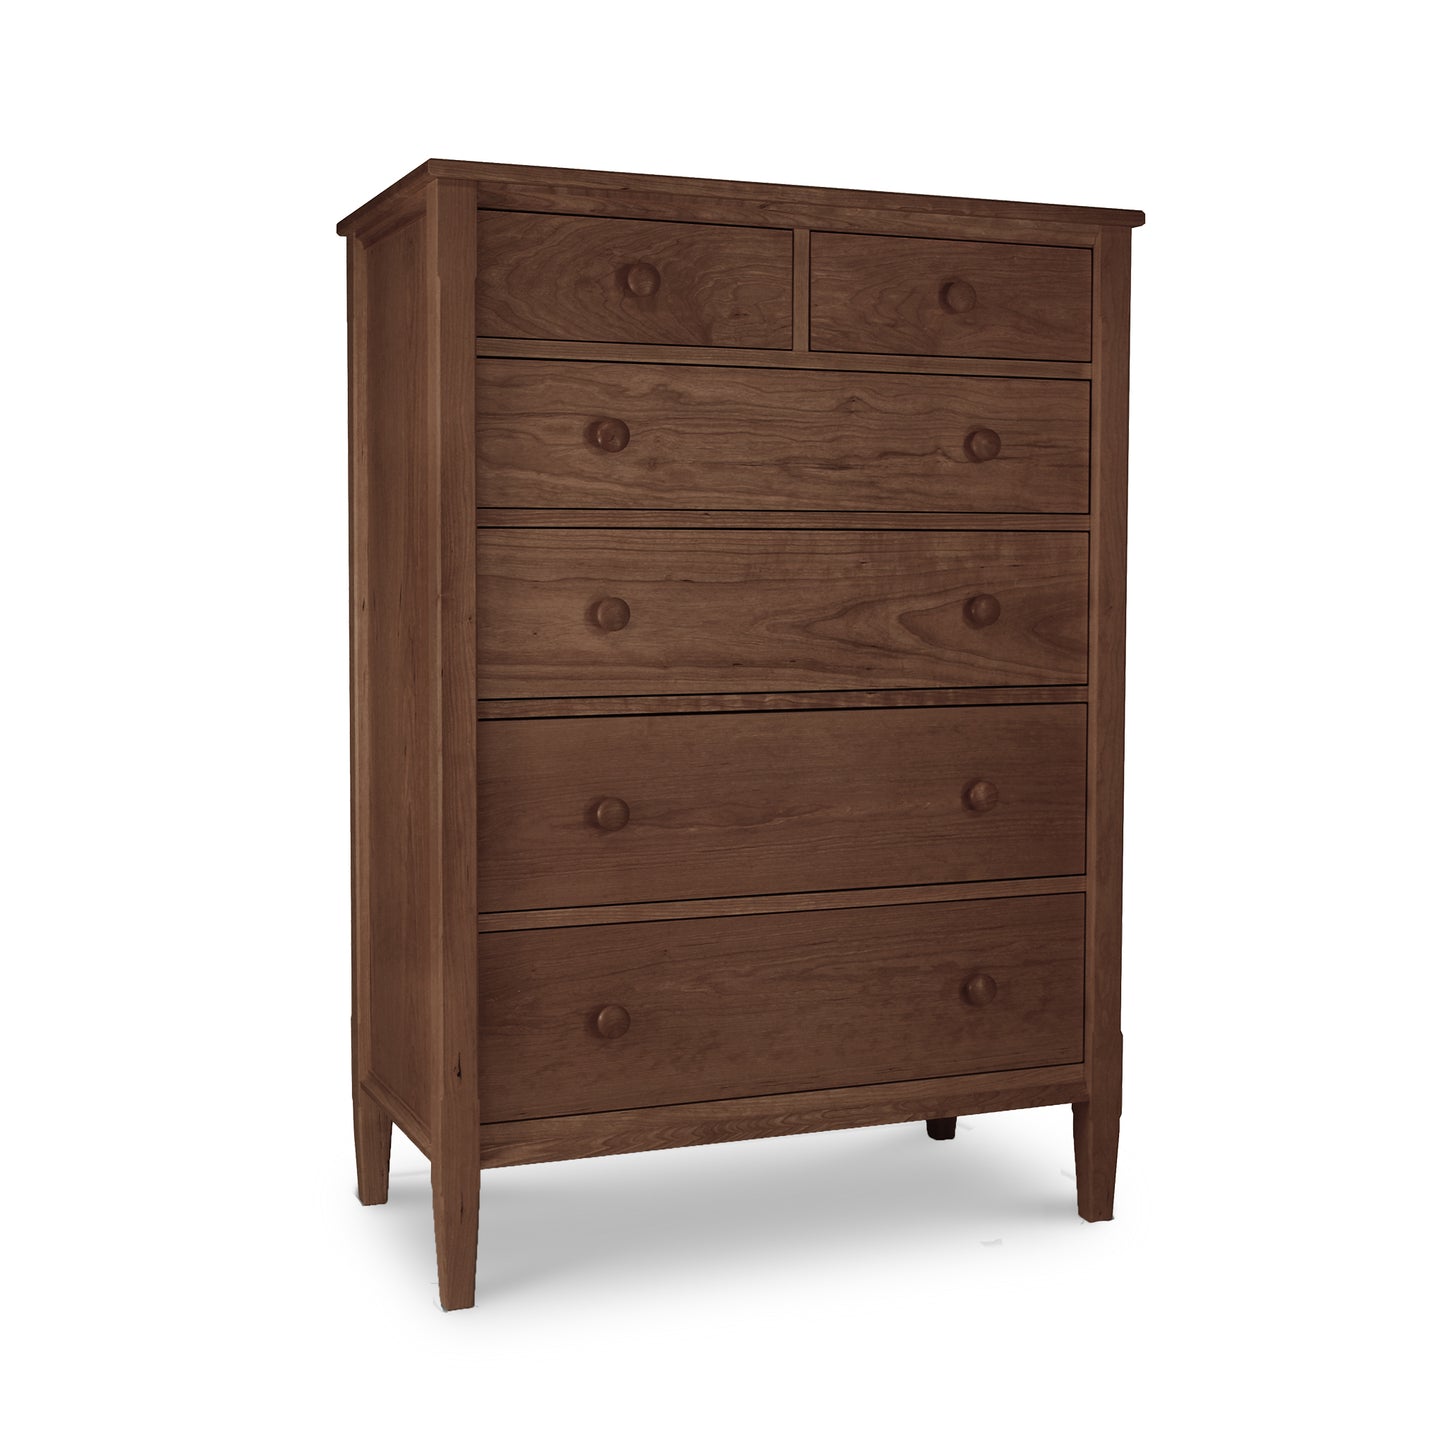 A Maple Corner Woodworks Vermont Shaker 6-Drawer Chest standing upright against a white background. The dresser features five drawers with round knobs and is designed in the Vermont Shaker Chest style, showcasing a simplistic, traditional look.